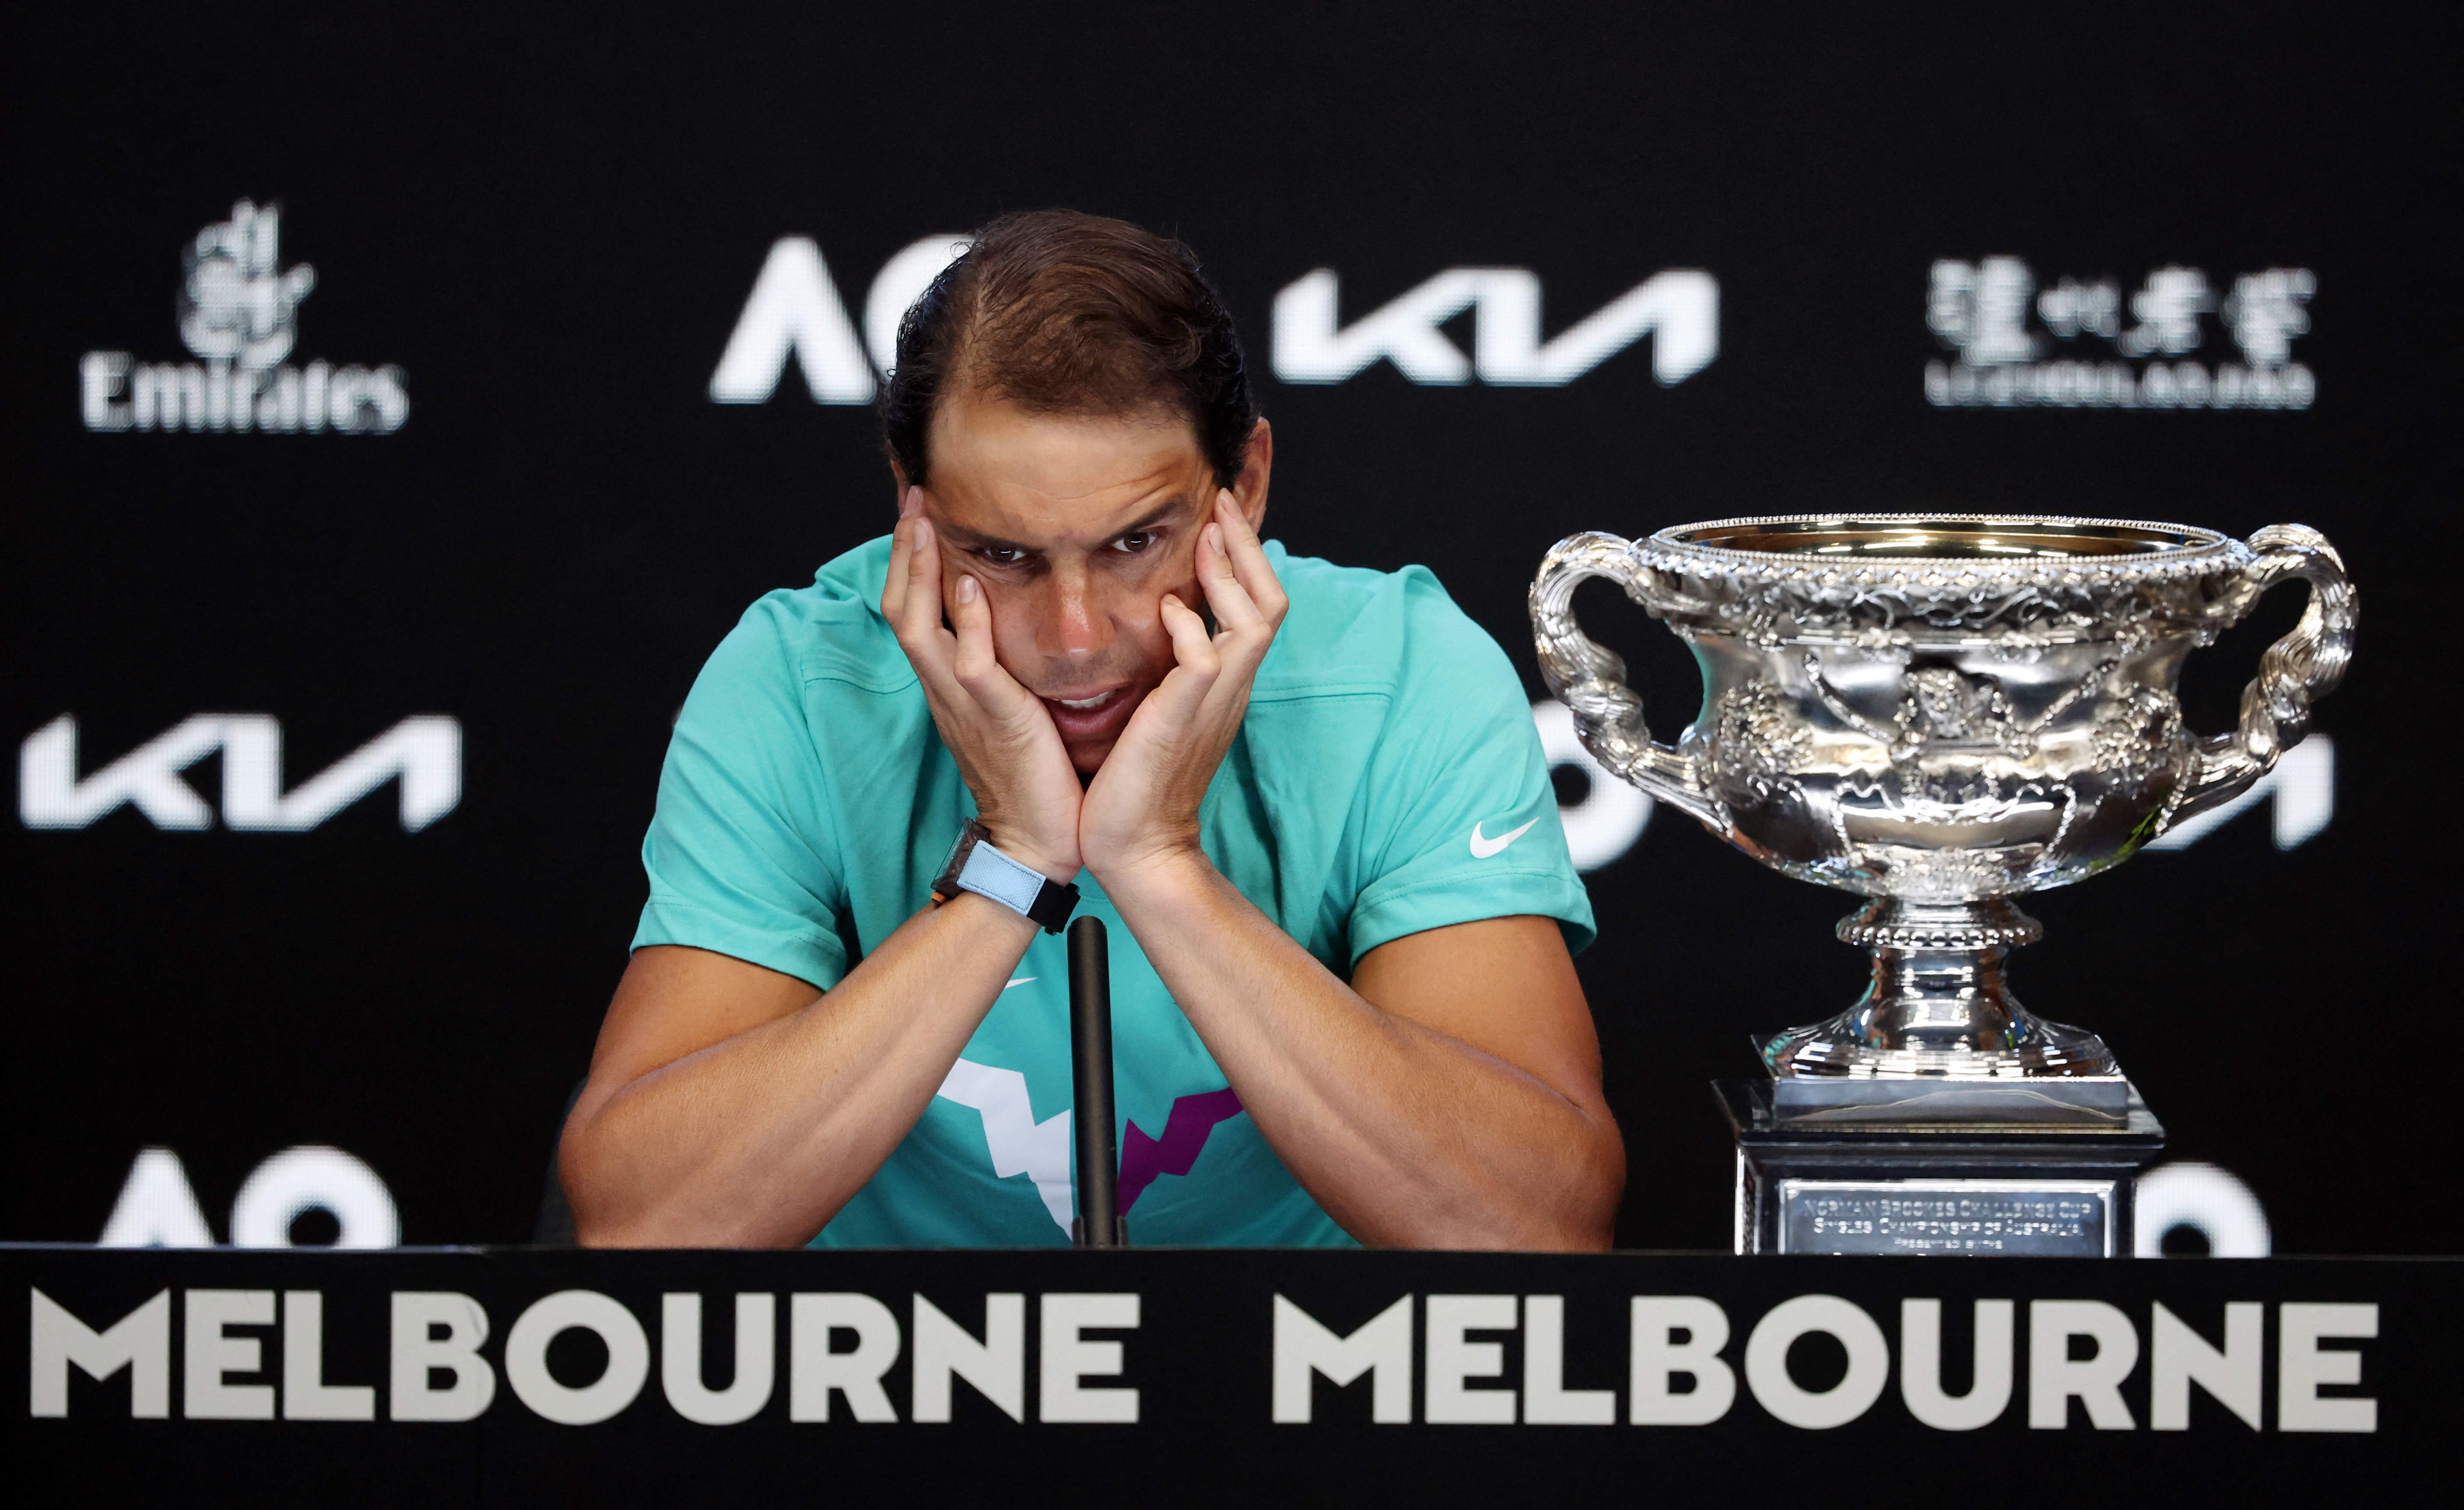 BEHIND THE SCENES: What started badly ended well, but Australian Open and tennis itself have storms ahead before 2023